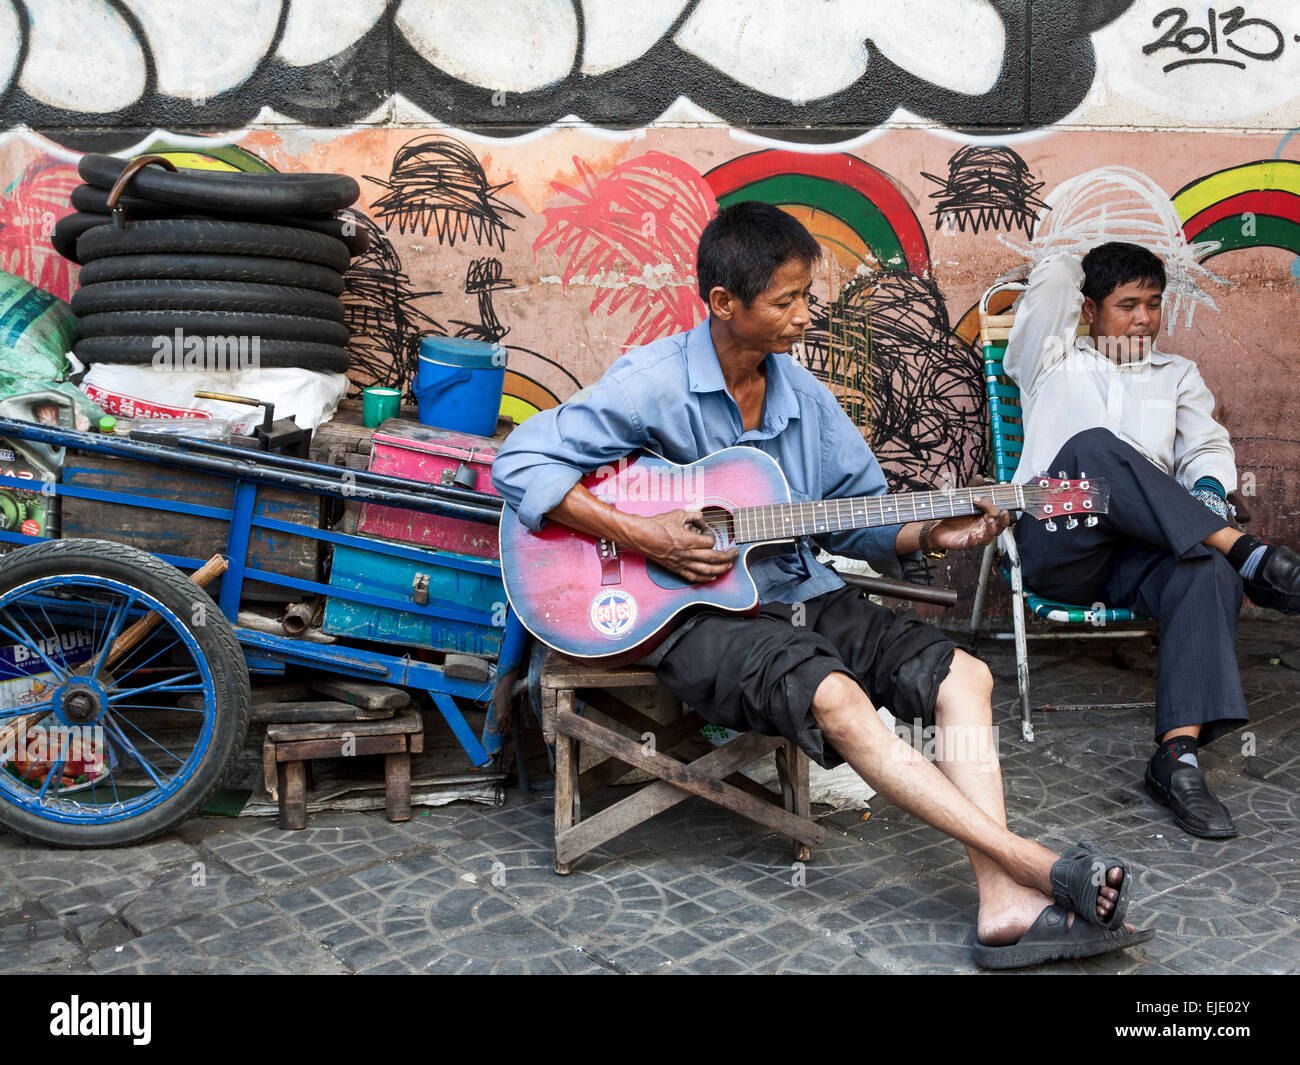 A worker playing guitar on the street in Phnom Penh, Cambodia, Asia. Stock Photo